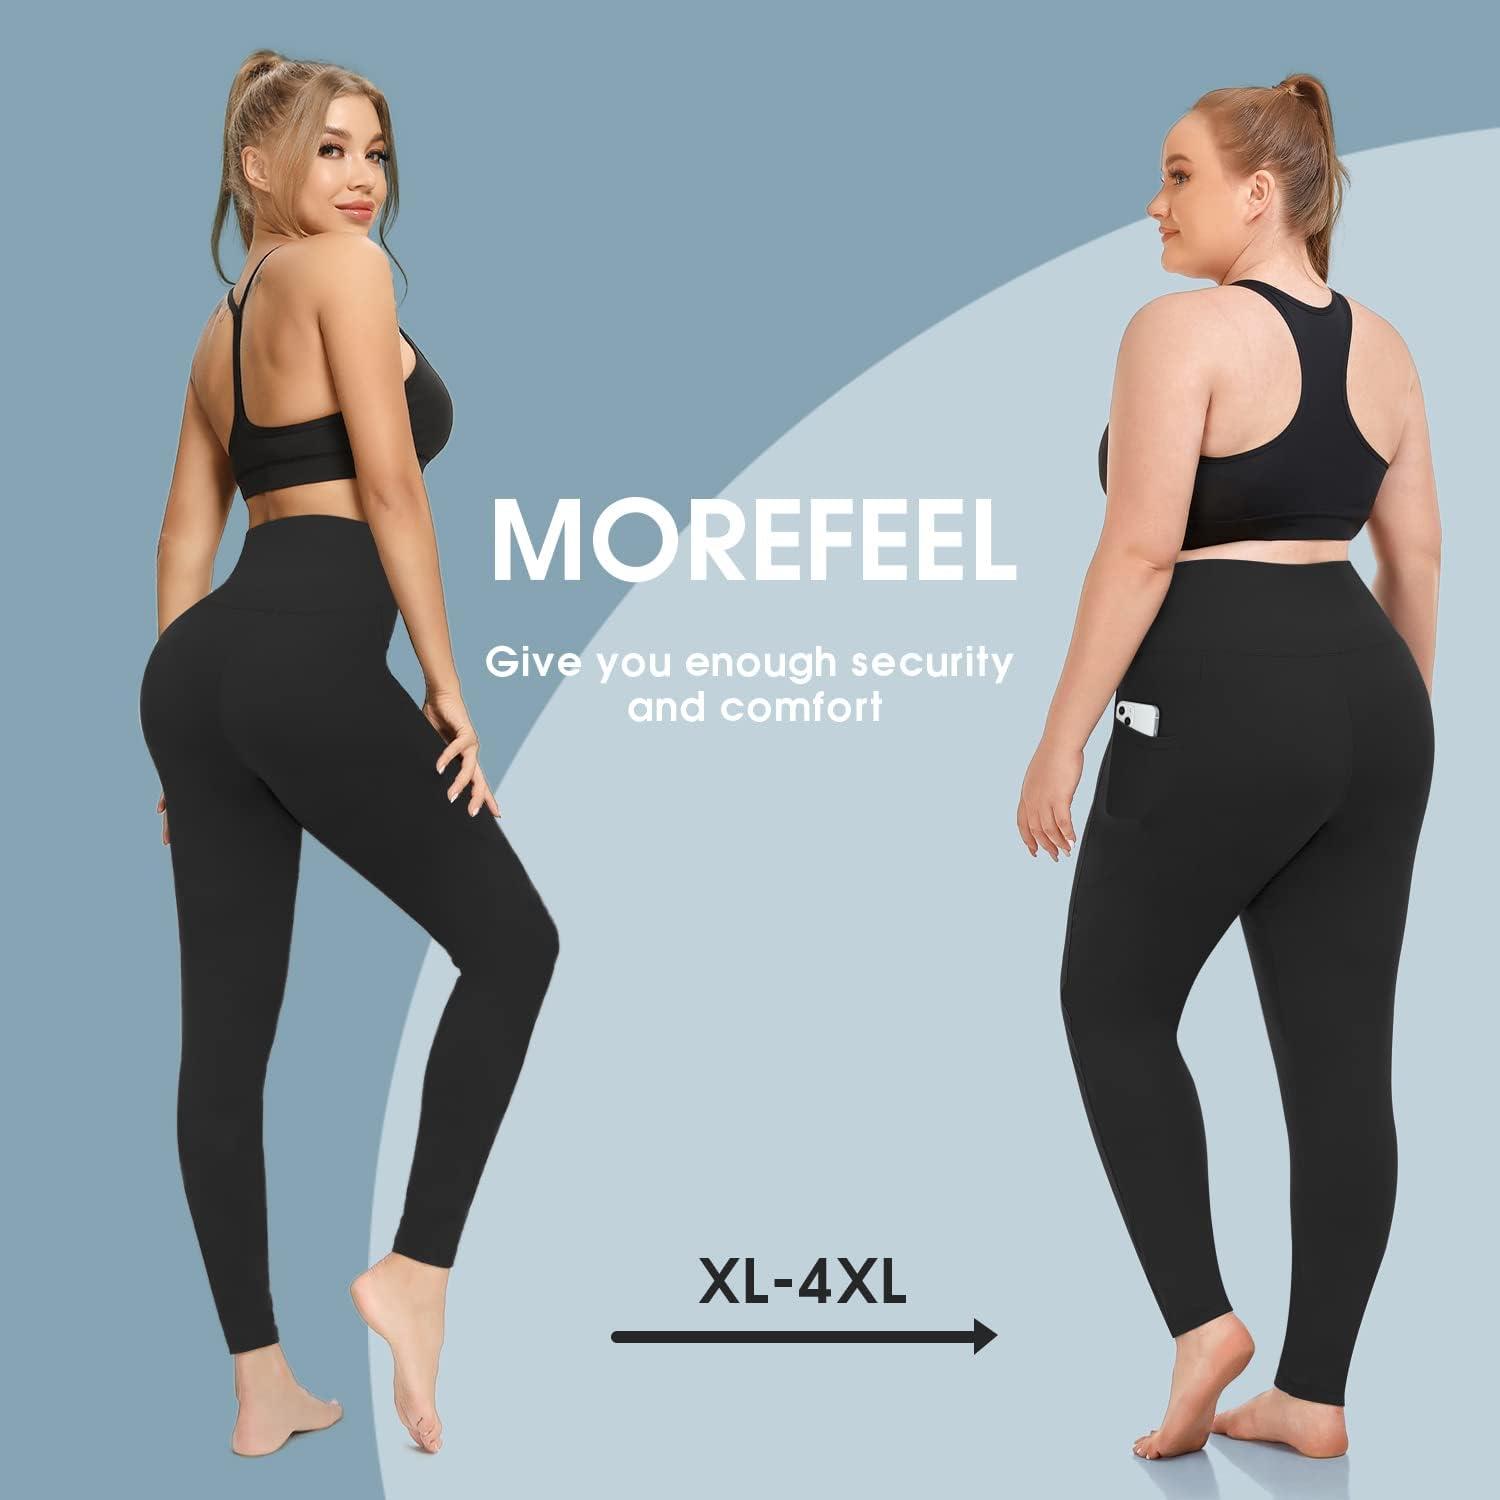 MOREFEEL Plus Size Leggings for Women with Pockets-Stretchy X-4XL Tummy  Control High Waist Workout Black Yoga Pants XX-Large 01 Black